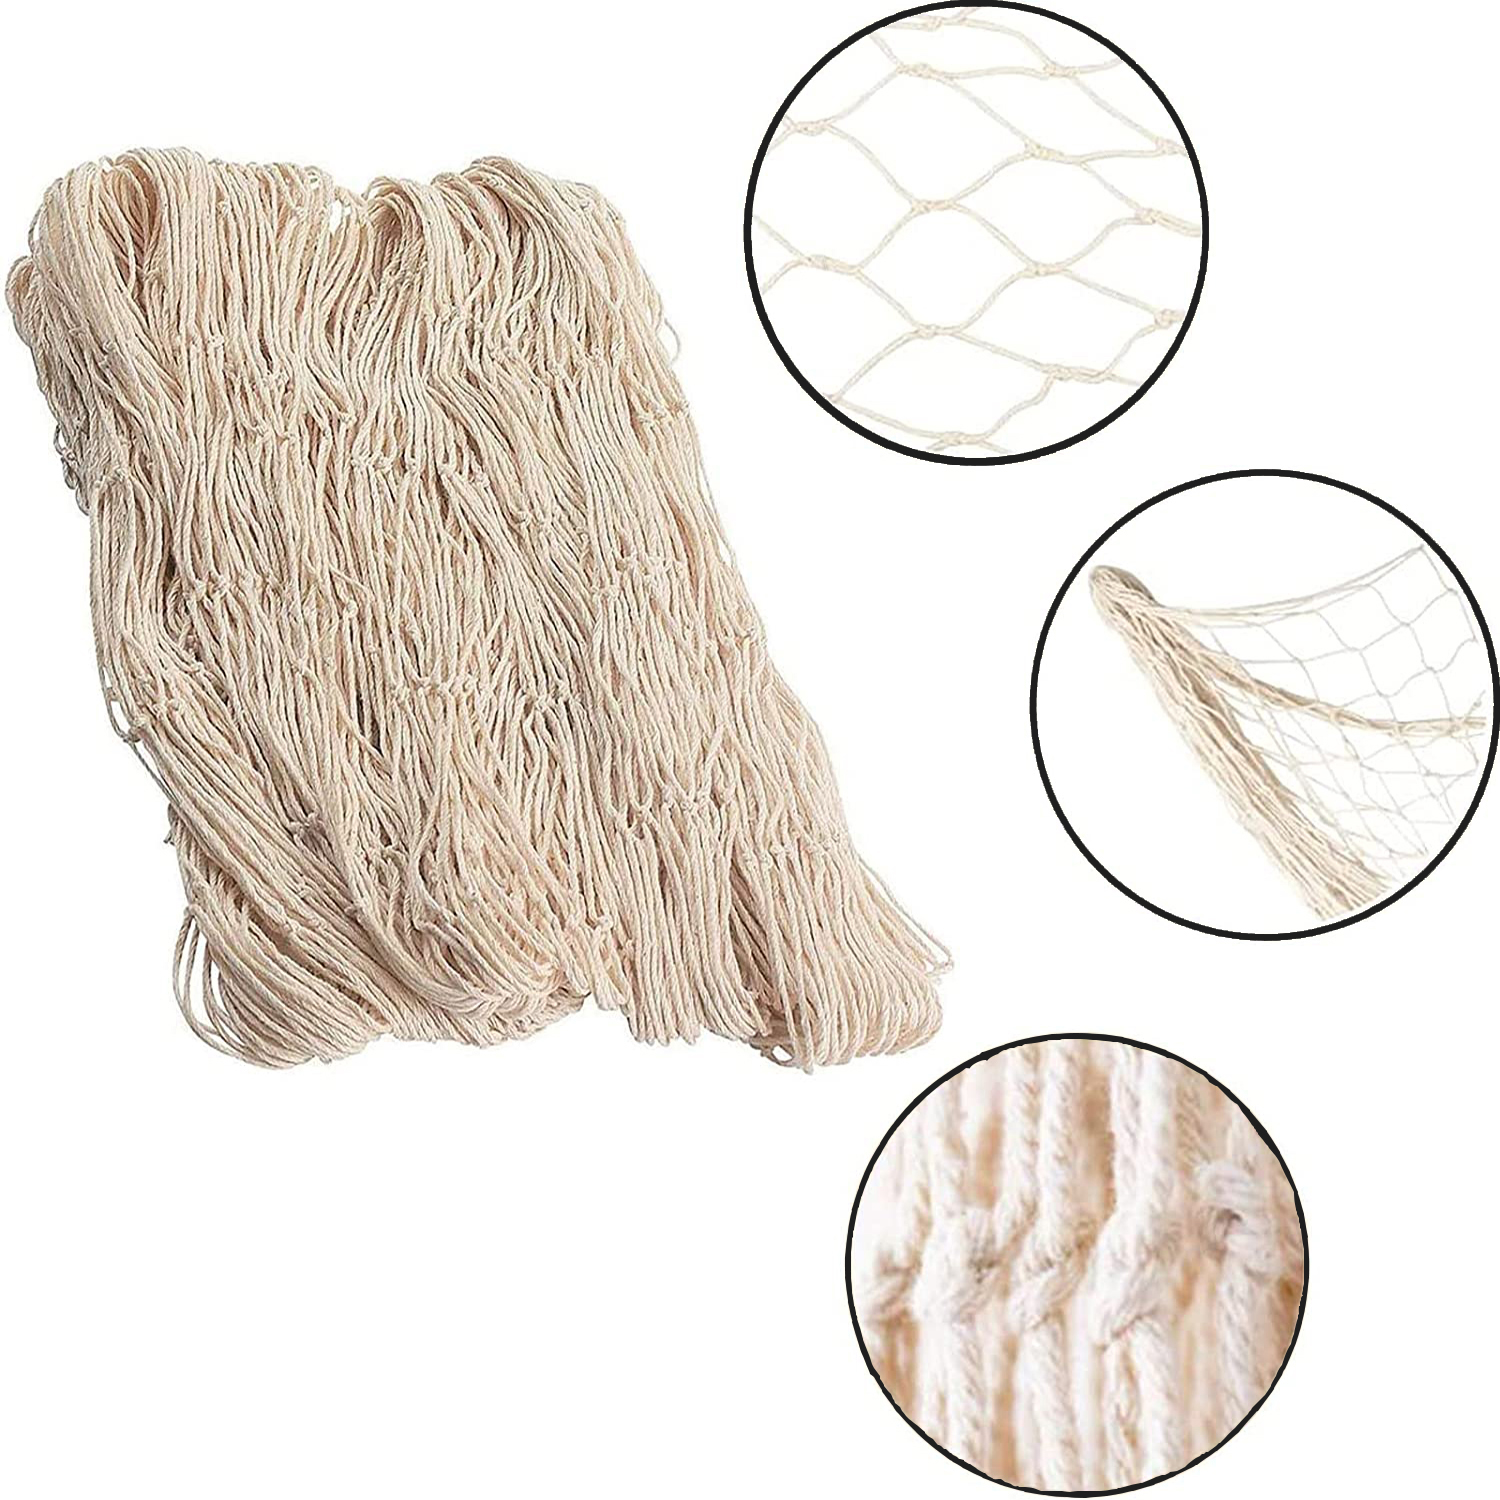 Cotton Fishing Net Decorative 79 Inch Beach Themed Decor Home Bedroom Party  Wall Decoration Fish Netting Decorative